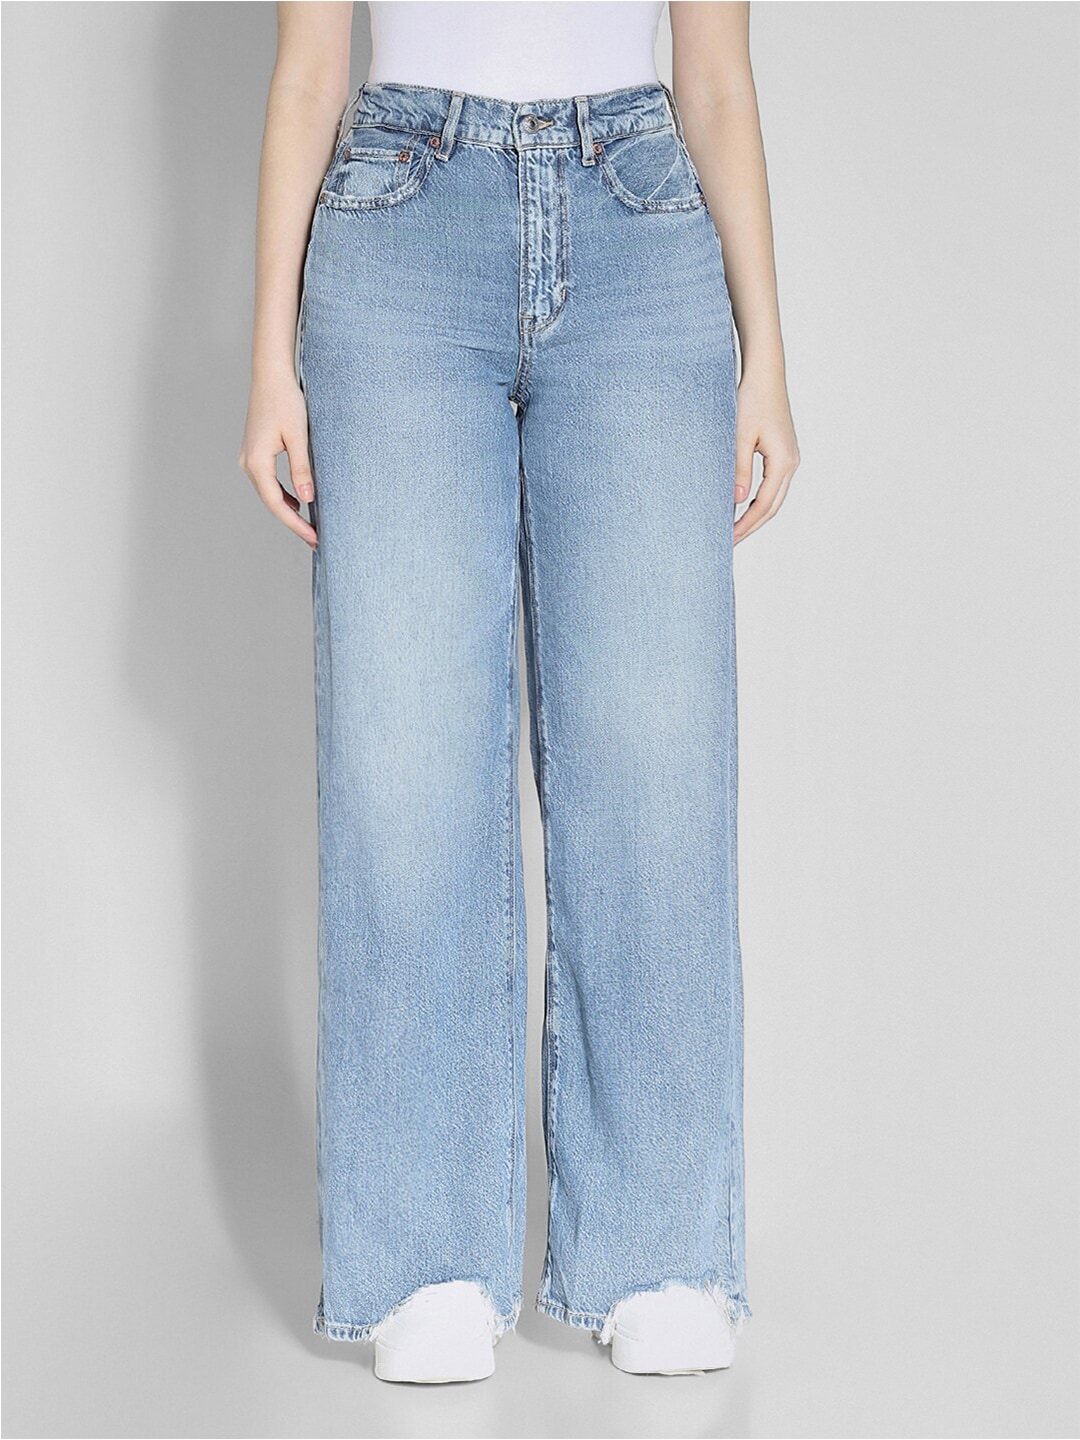 AMERICAN EAGLE OUTFITTERS Women Dreamy Drape Super High-Waisted Baggy Wide-Leg Jeans